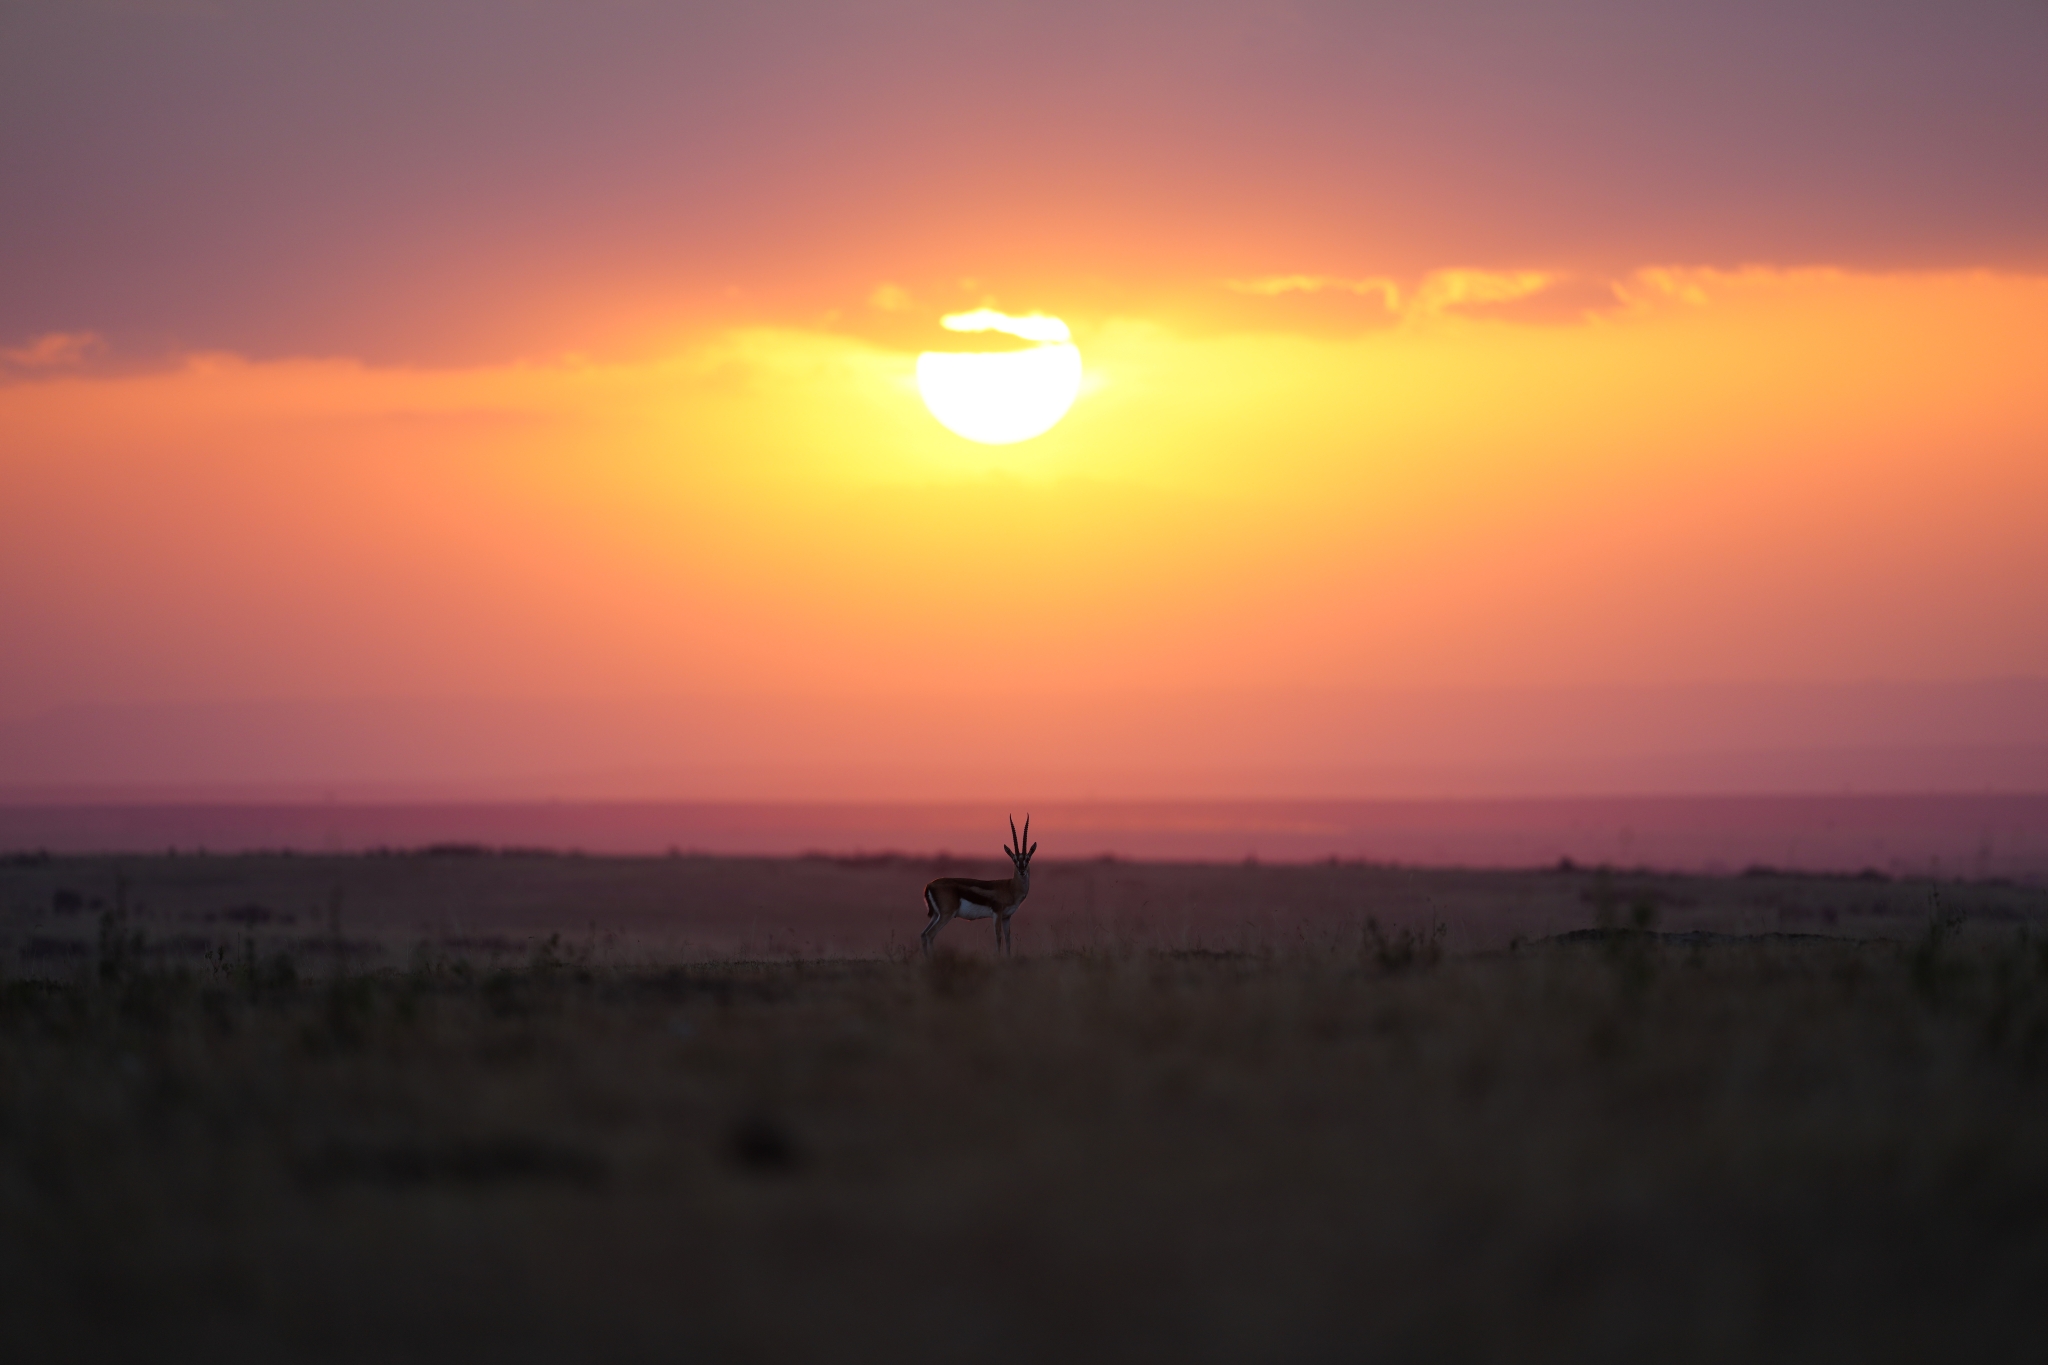 Gazelles silhouetted on a plain against an orange-pink sky